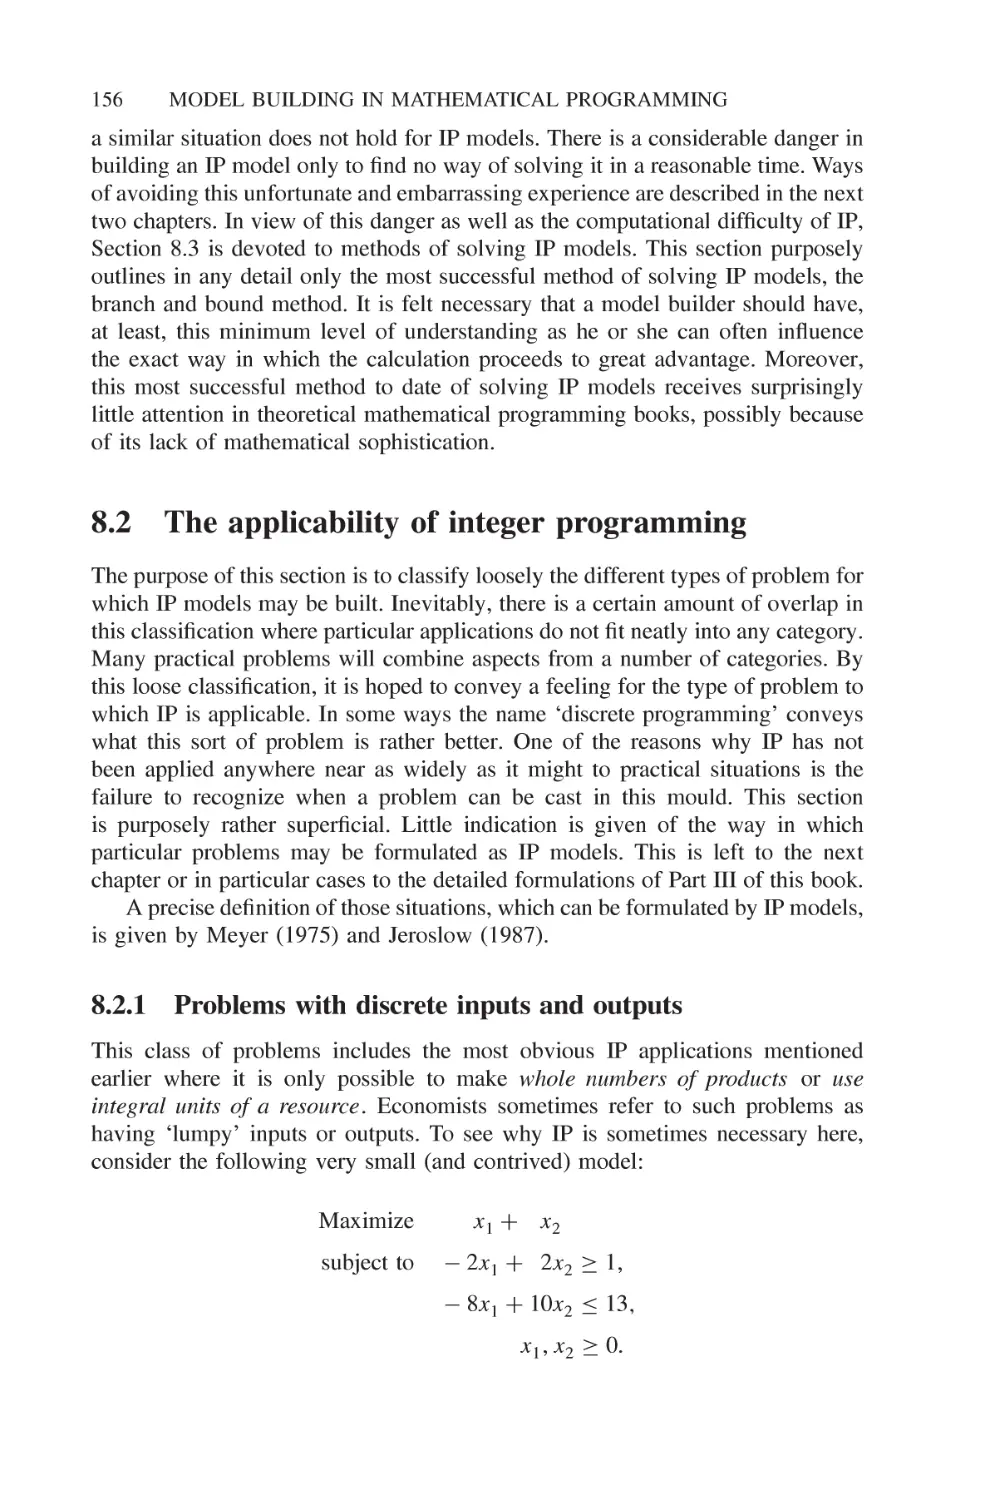 8.2 The applicability of integer programming